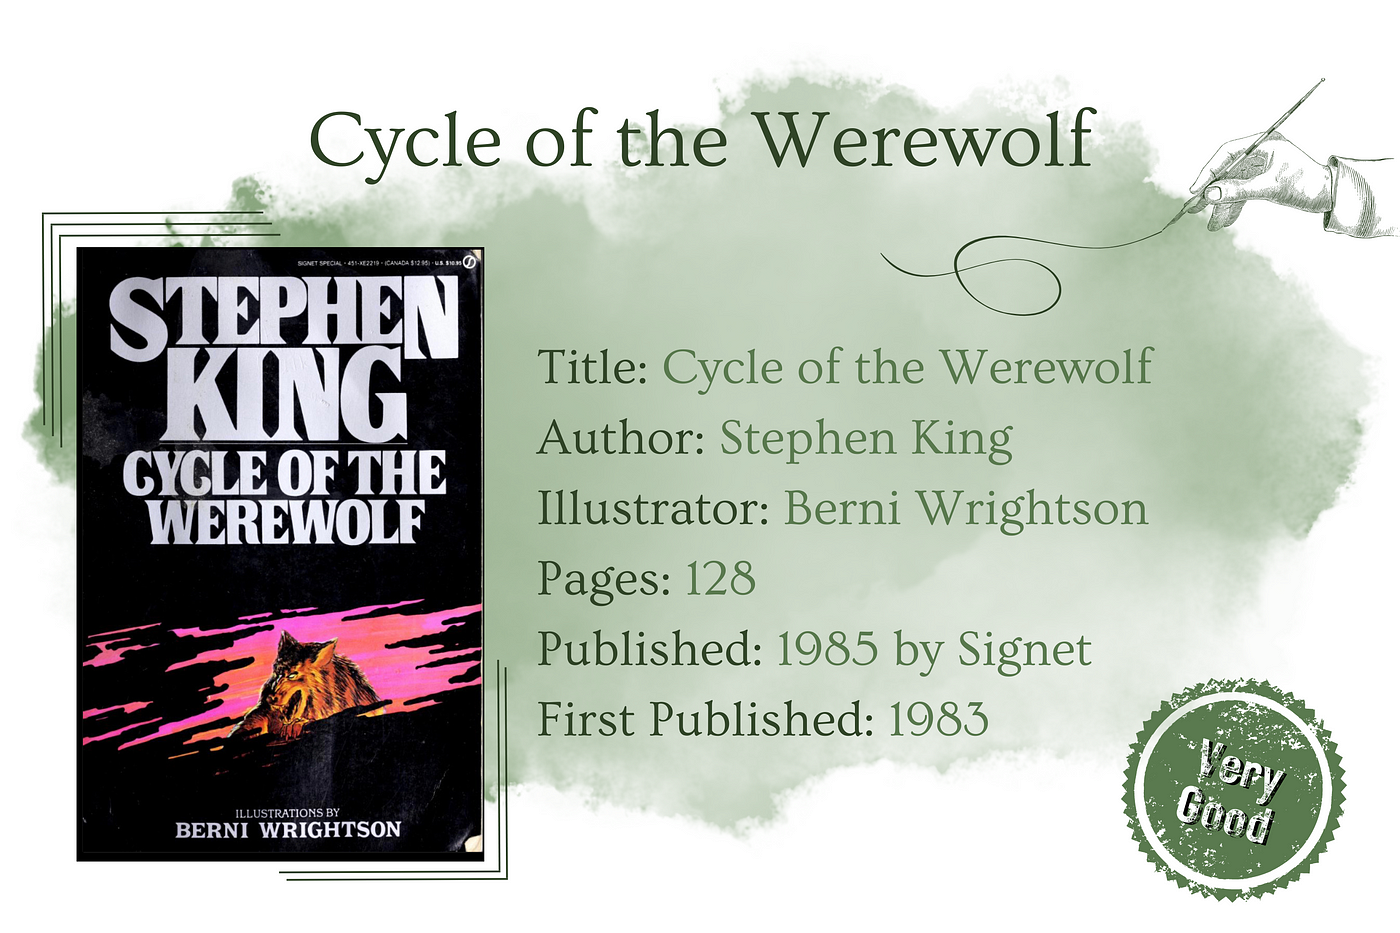 Cycle of the Werewolf - Wikipedia